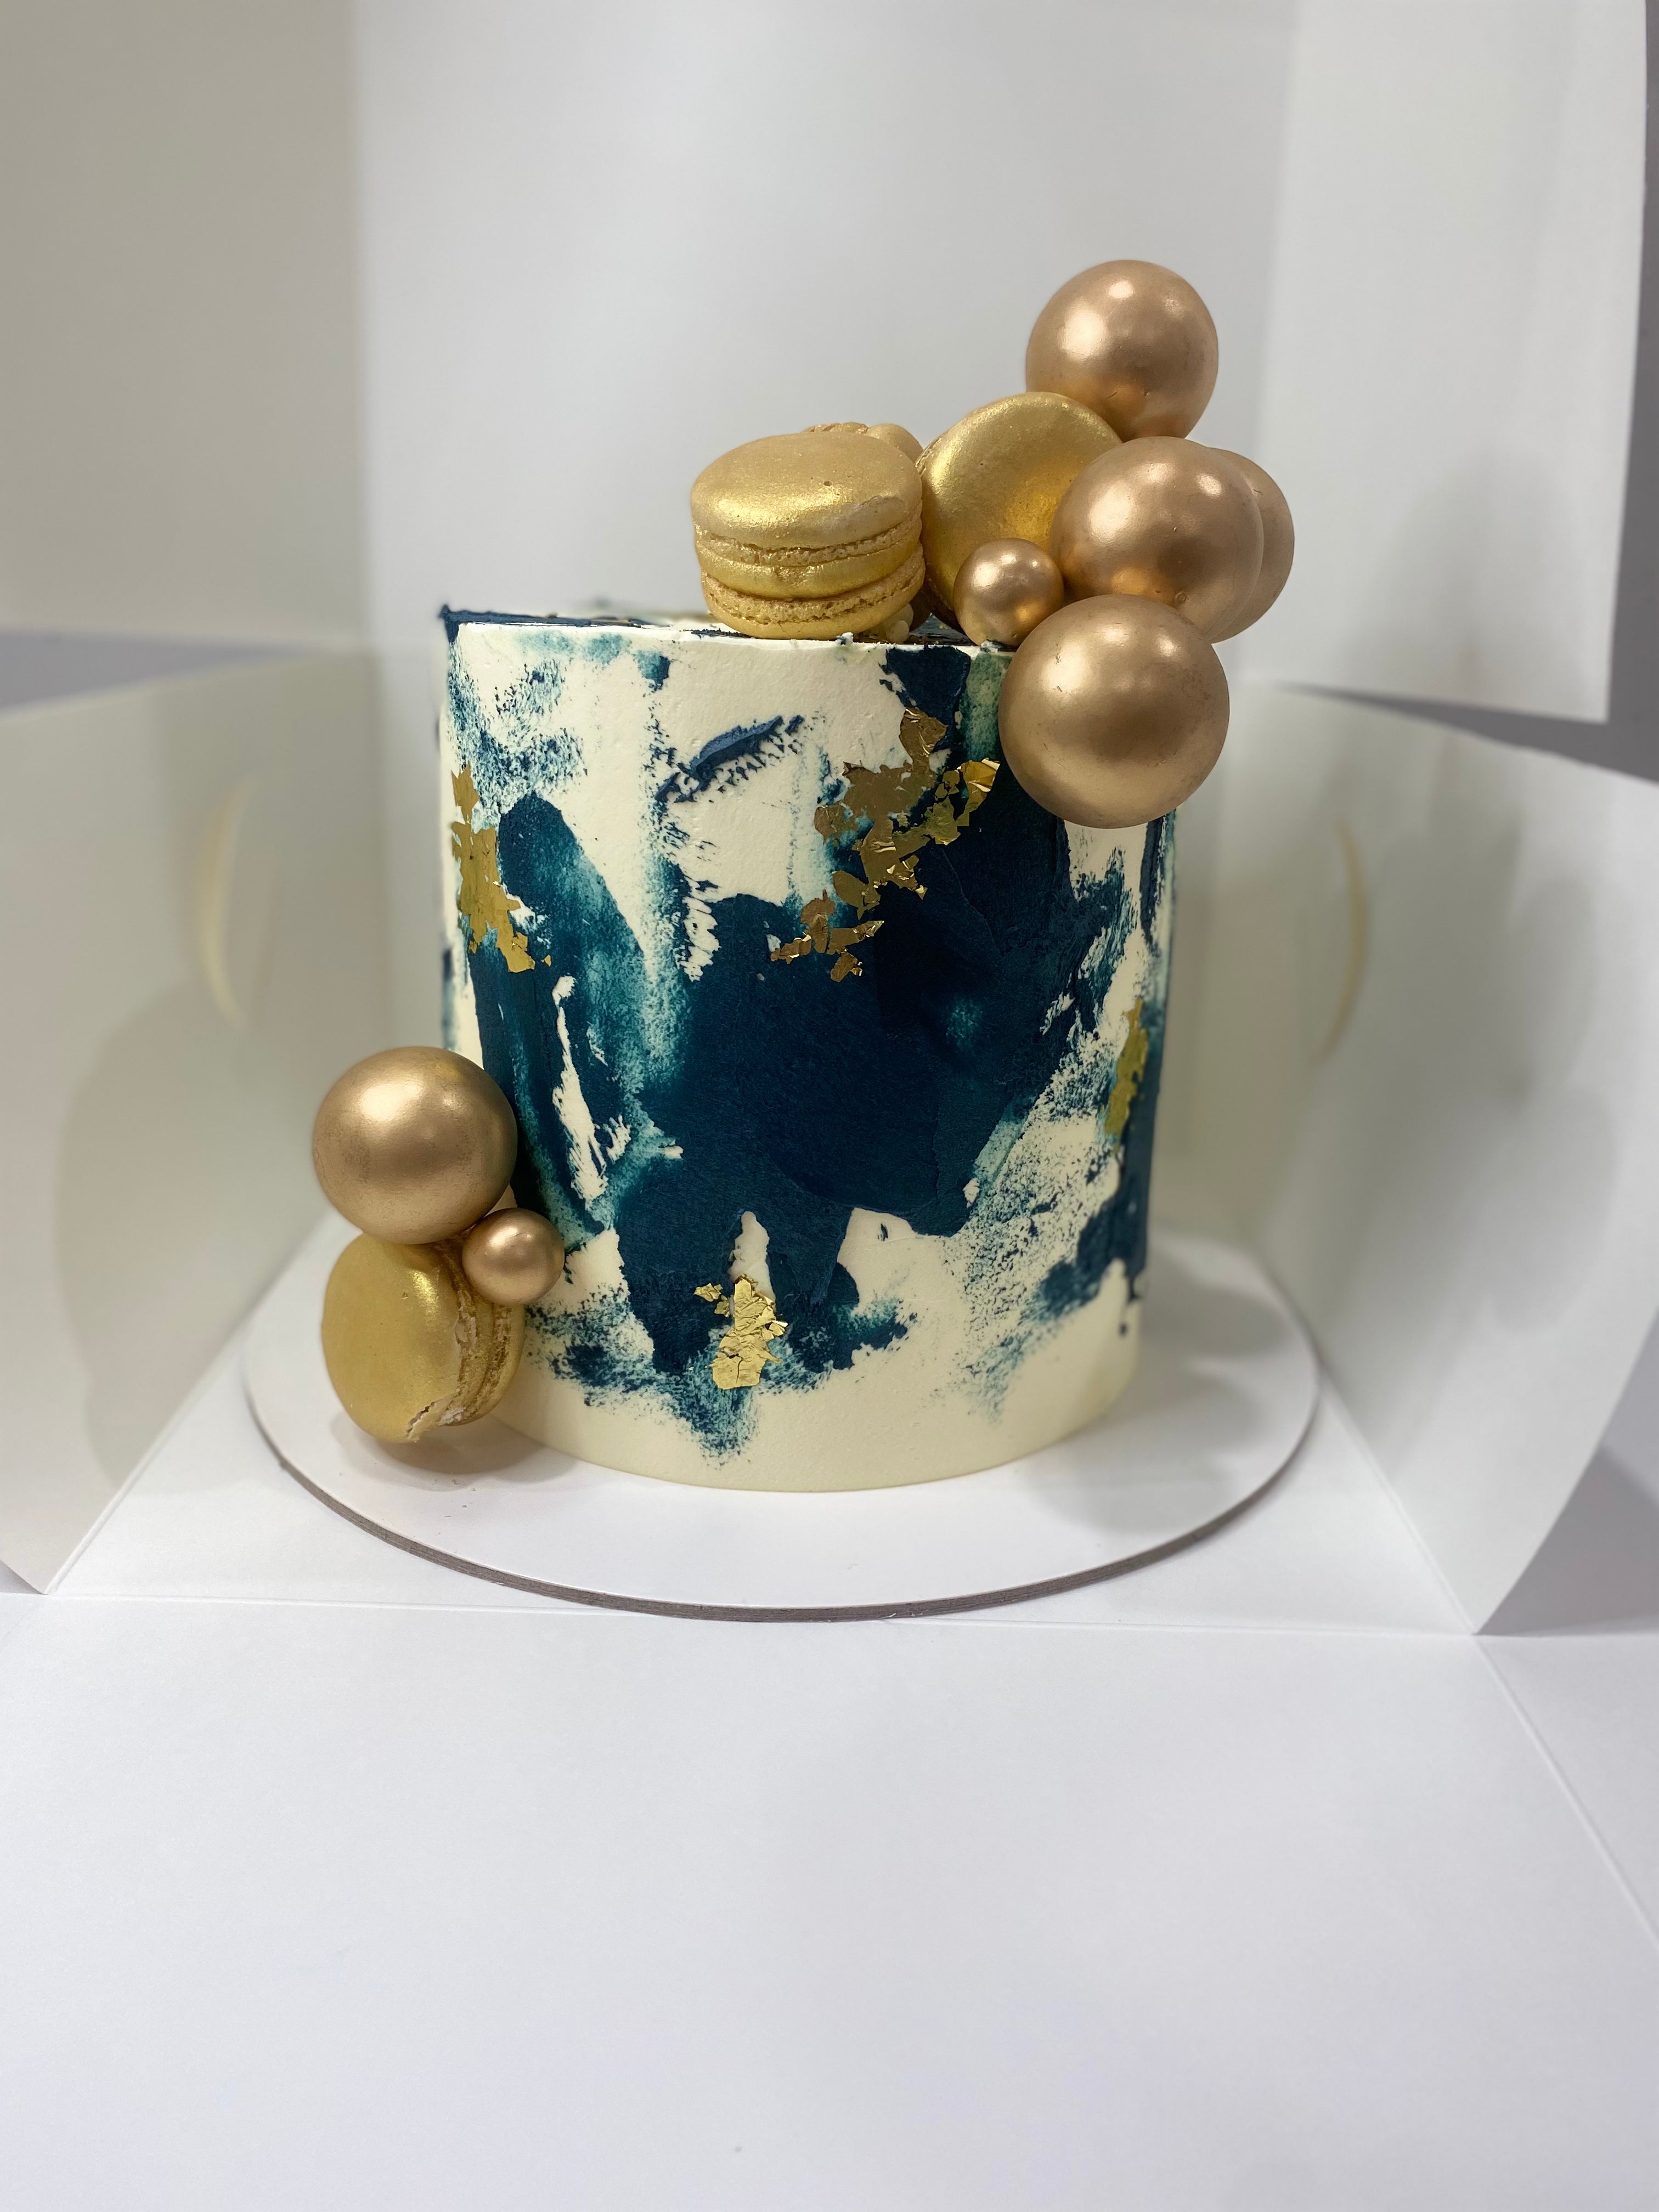 Neil /navy and gold Cake